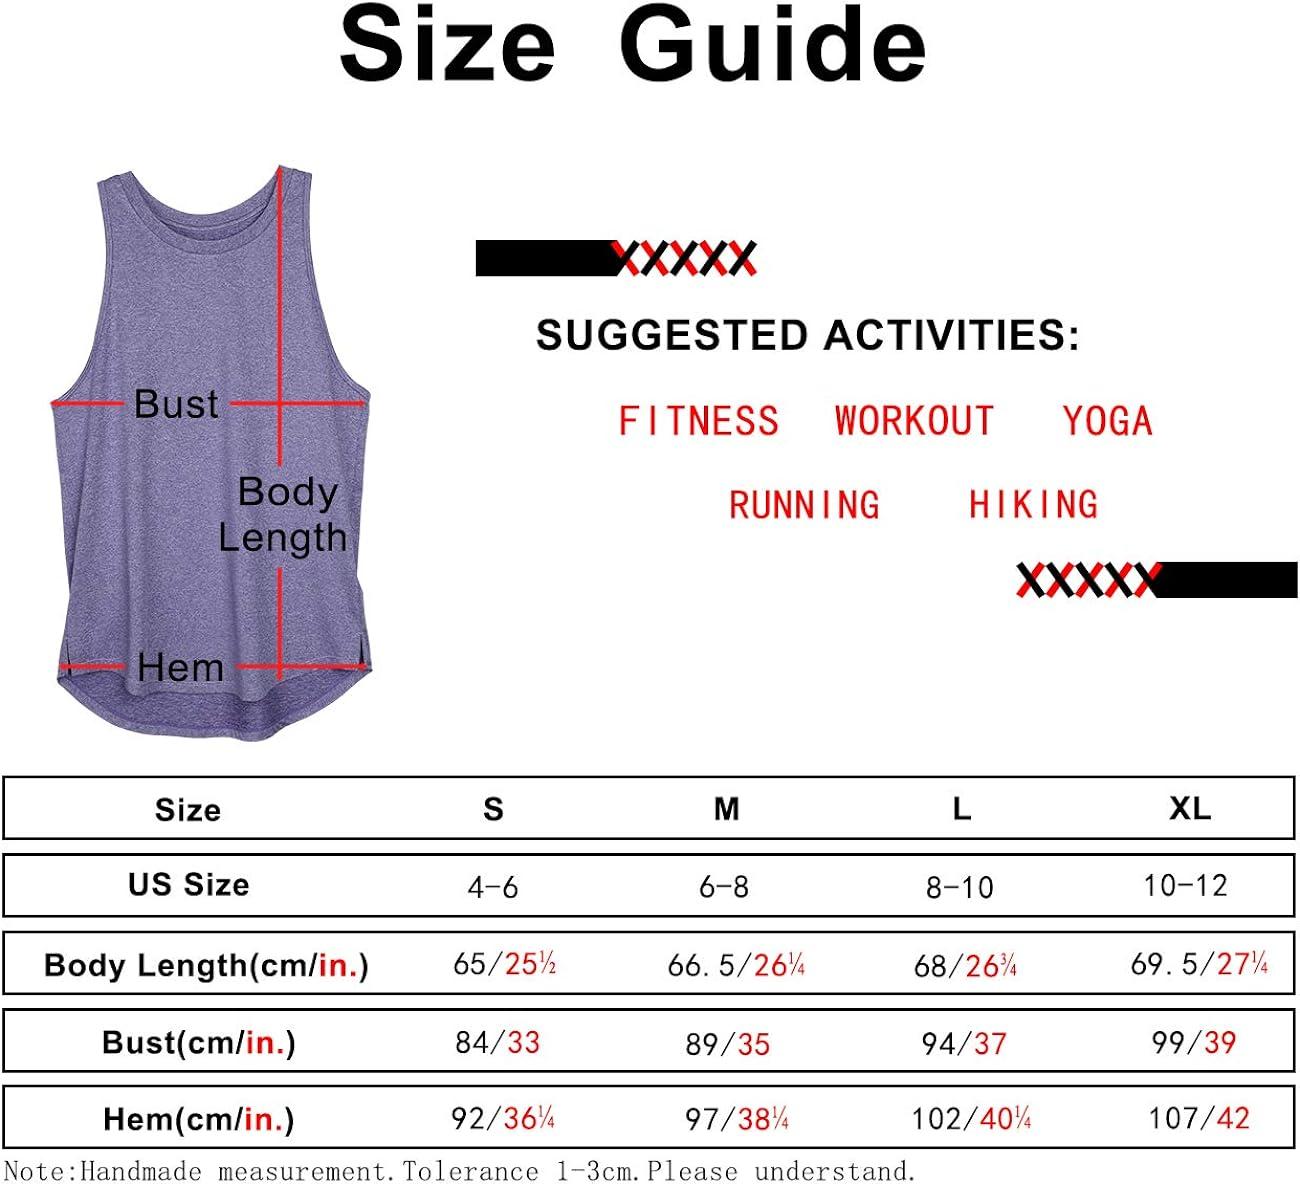 icyzone Women's Racerback Workout Tank Tops - Athletic Yoga Tops Running  Exercise Gym Shirts (Pack of 3) Medium Charcoal/Jade/Hot Pink